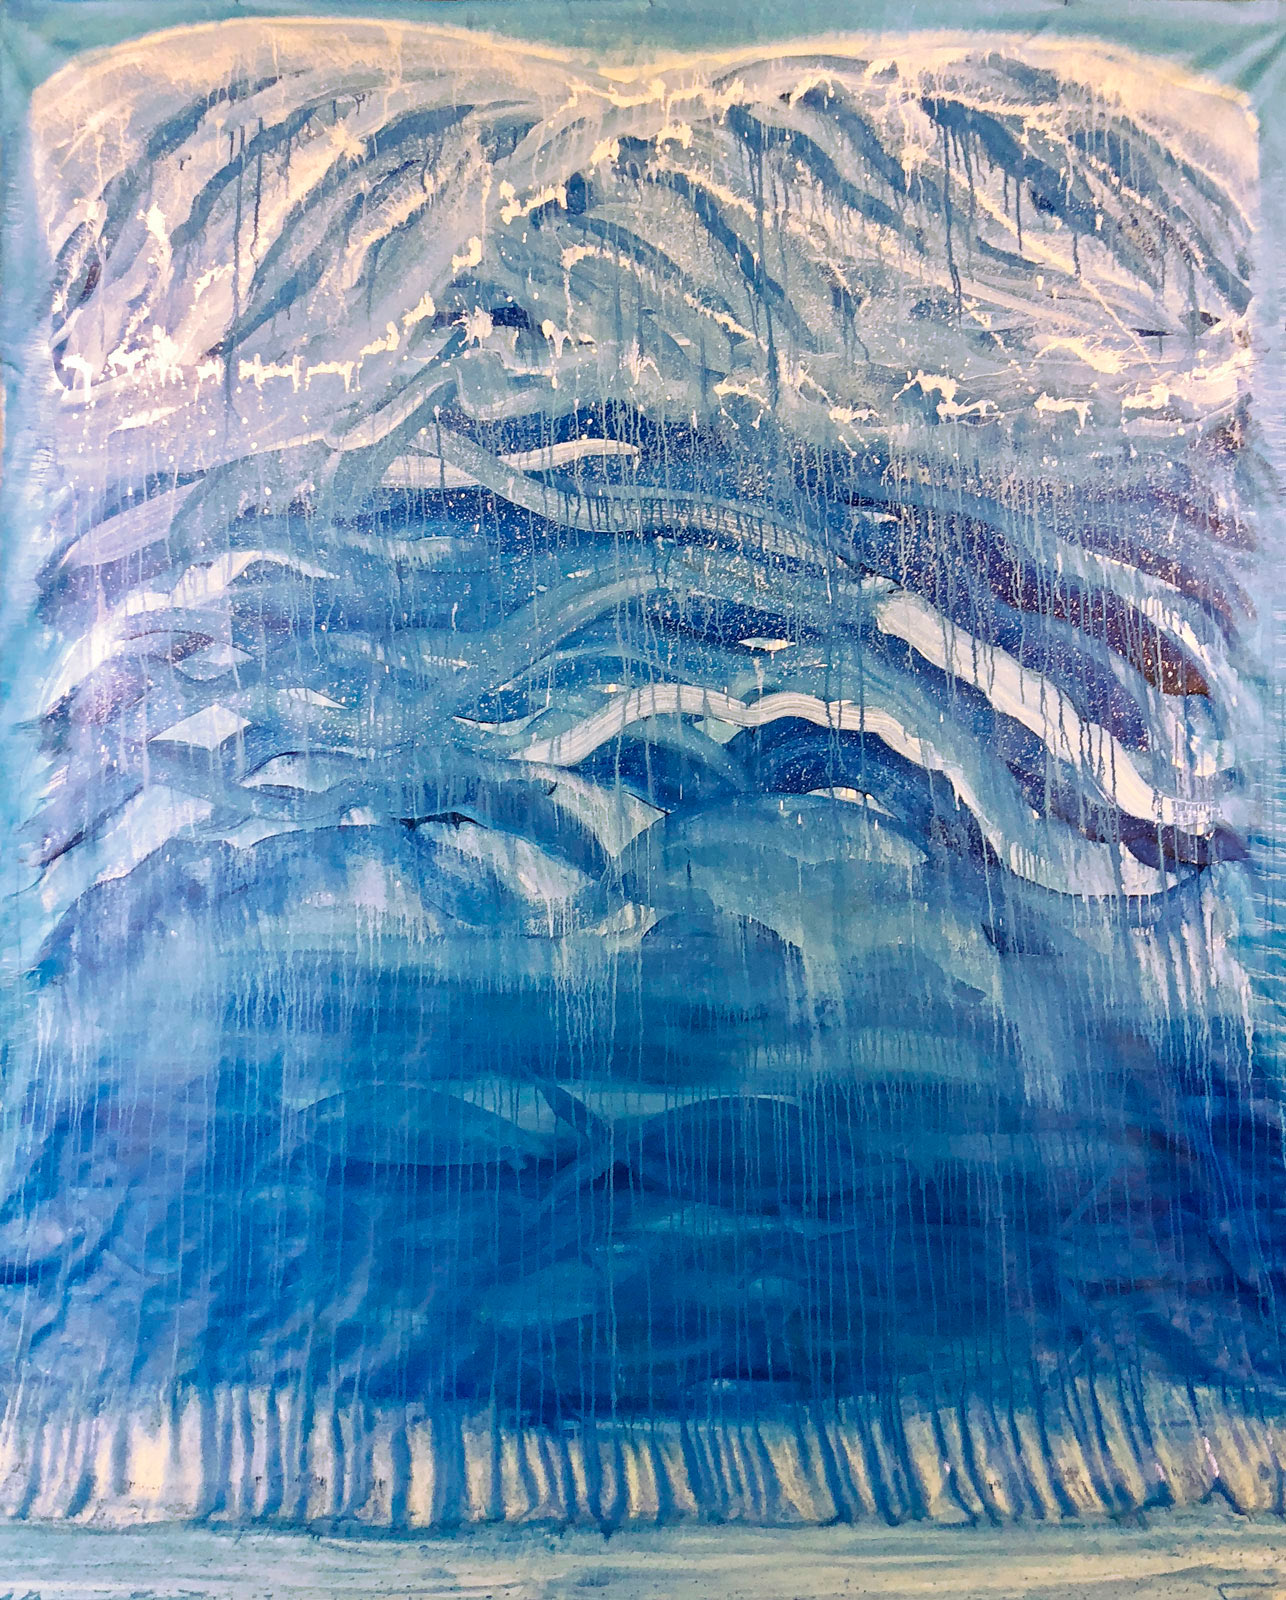 Blue Waves and Fish, 2018, acrylic on canvas, 8 x 6.5 ft, $10,000